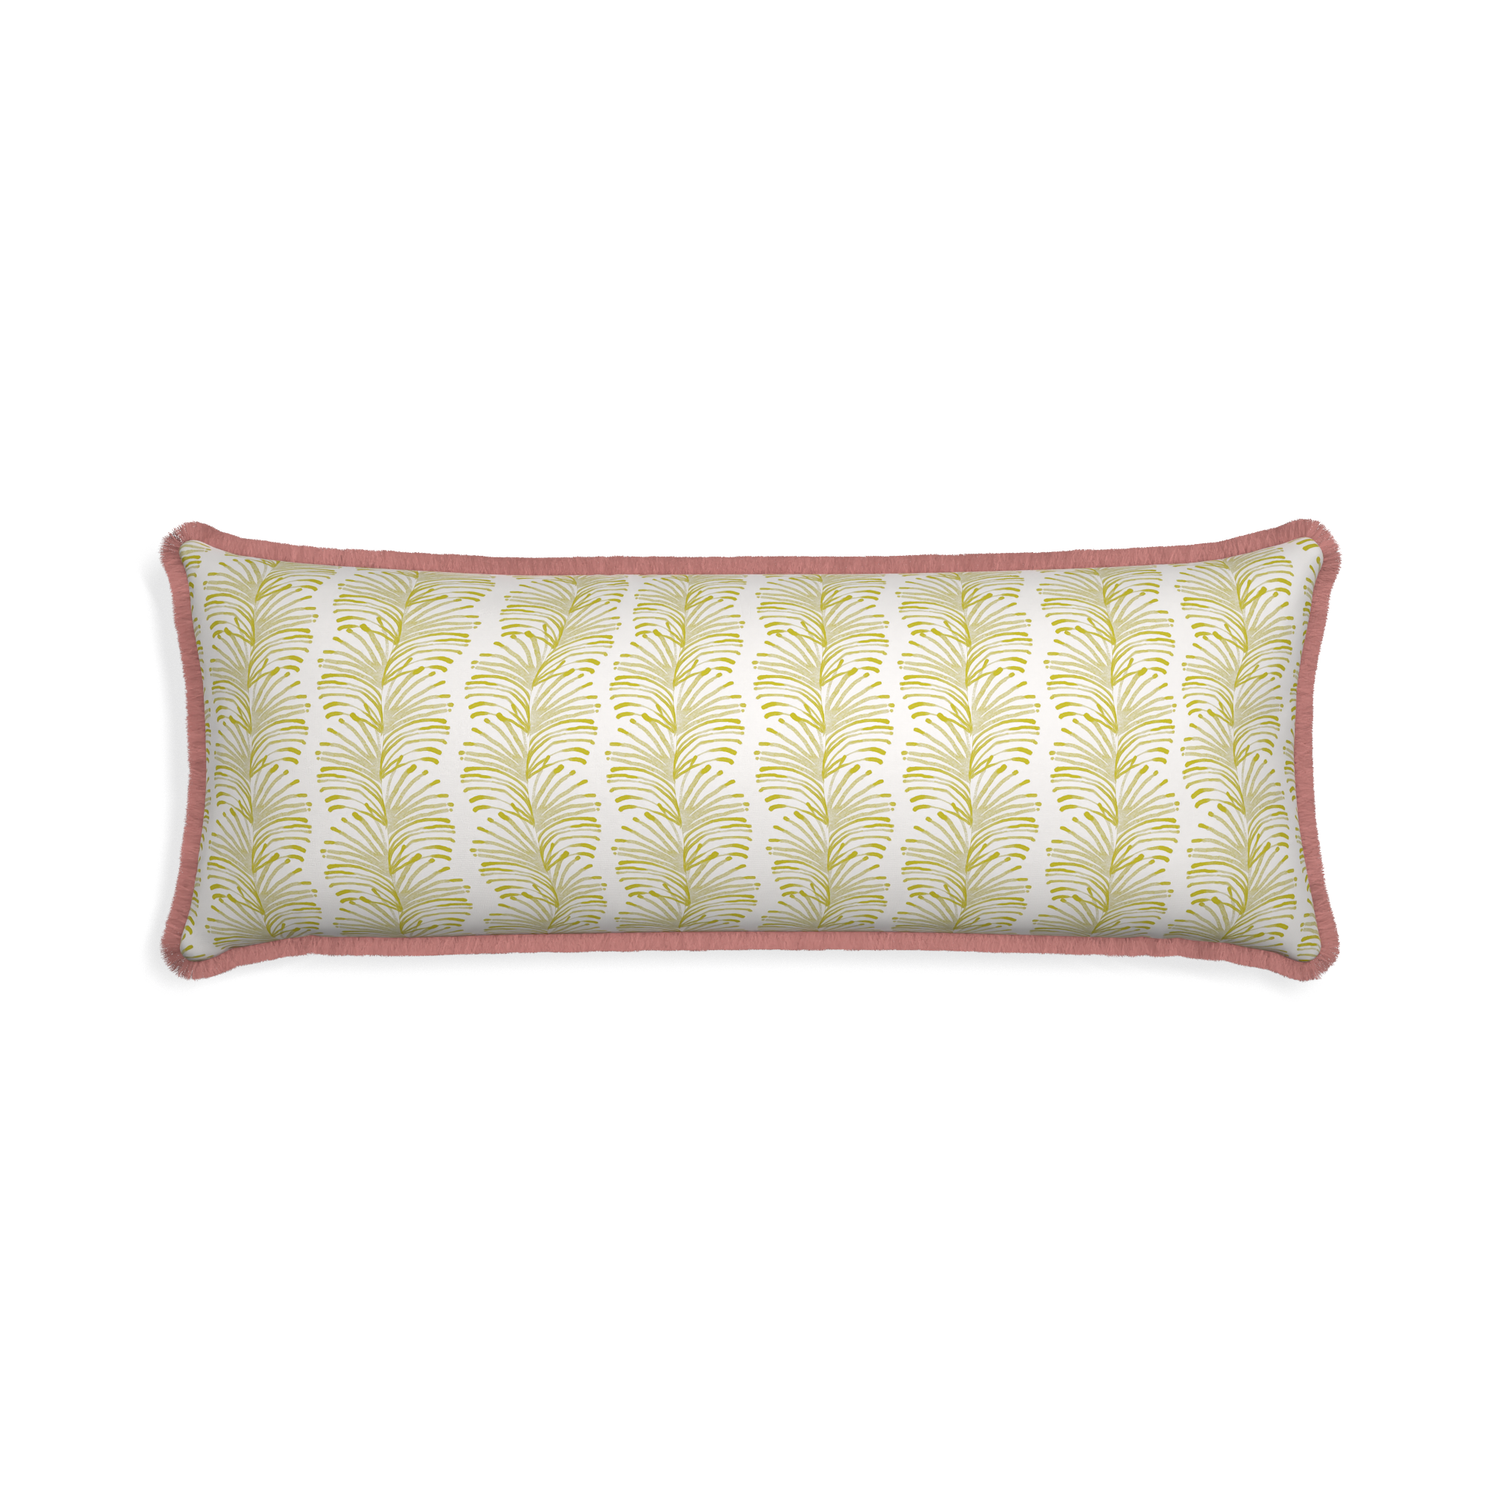 Xl-lumbar emma chartreuse custom yellow stripe chartreusepillow with d fringe on white background